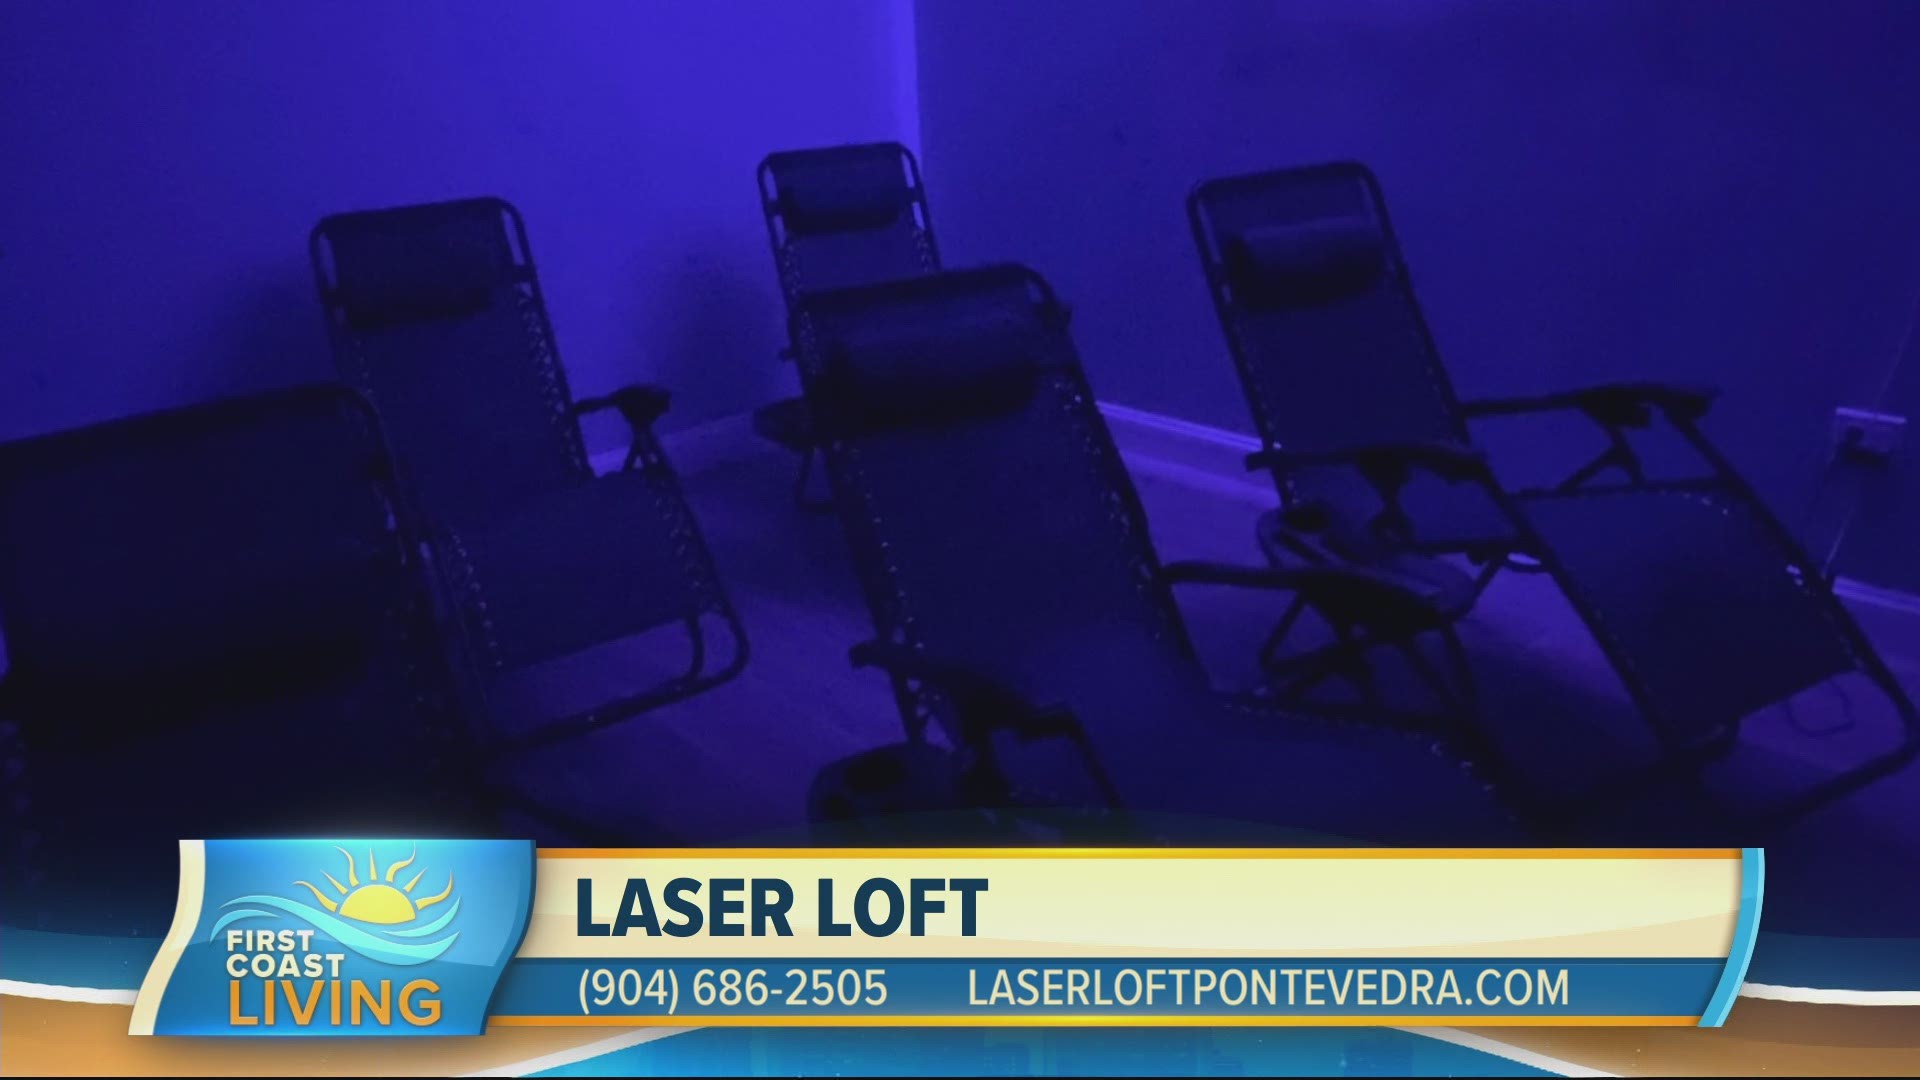 Laser Loft is offering a special to help you kick off the new year right!